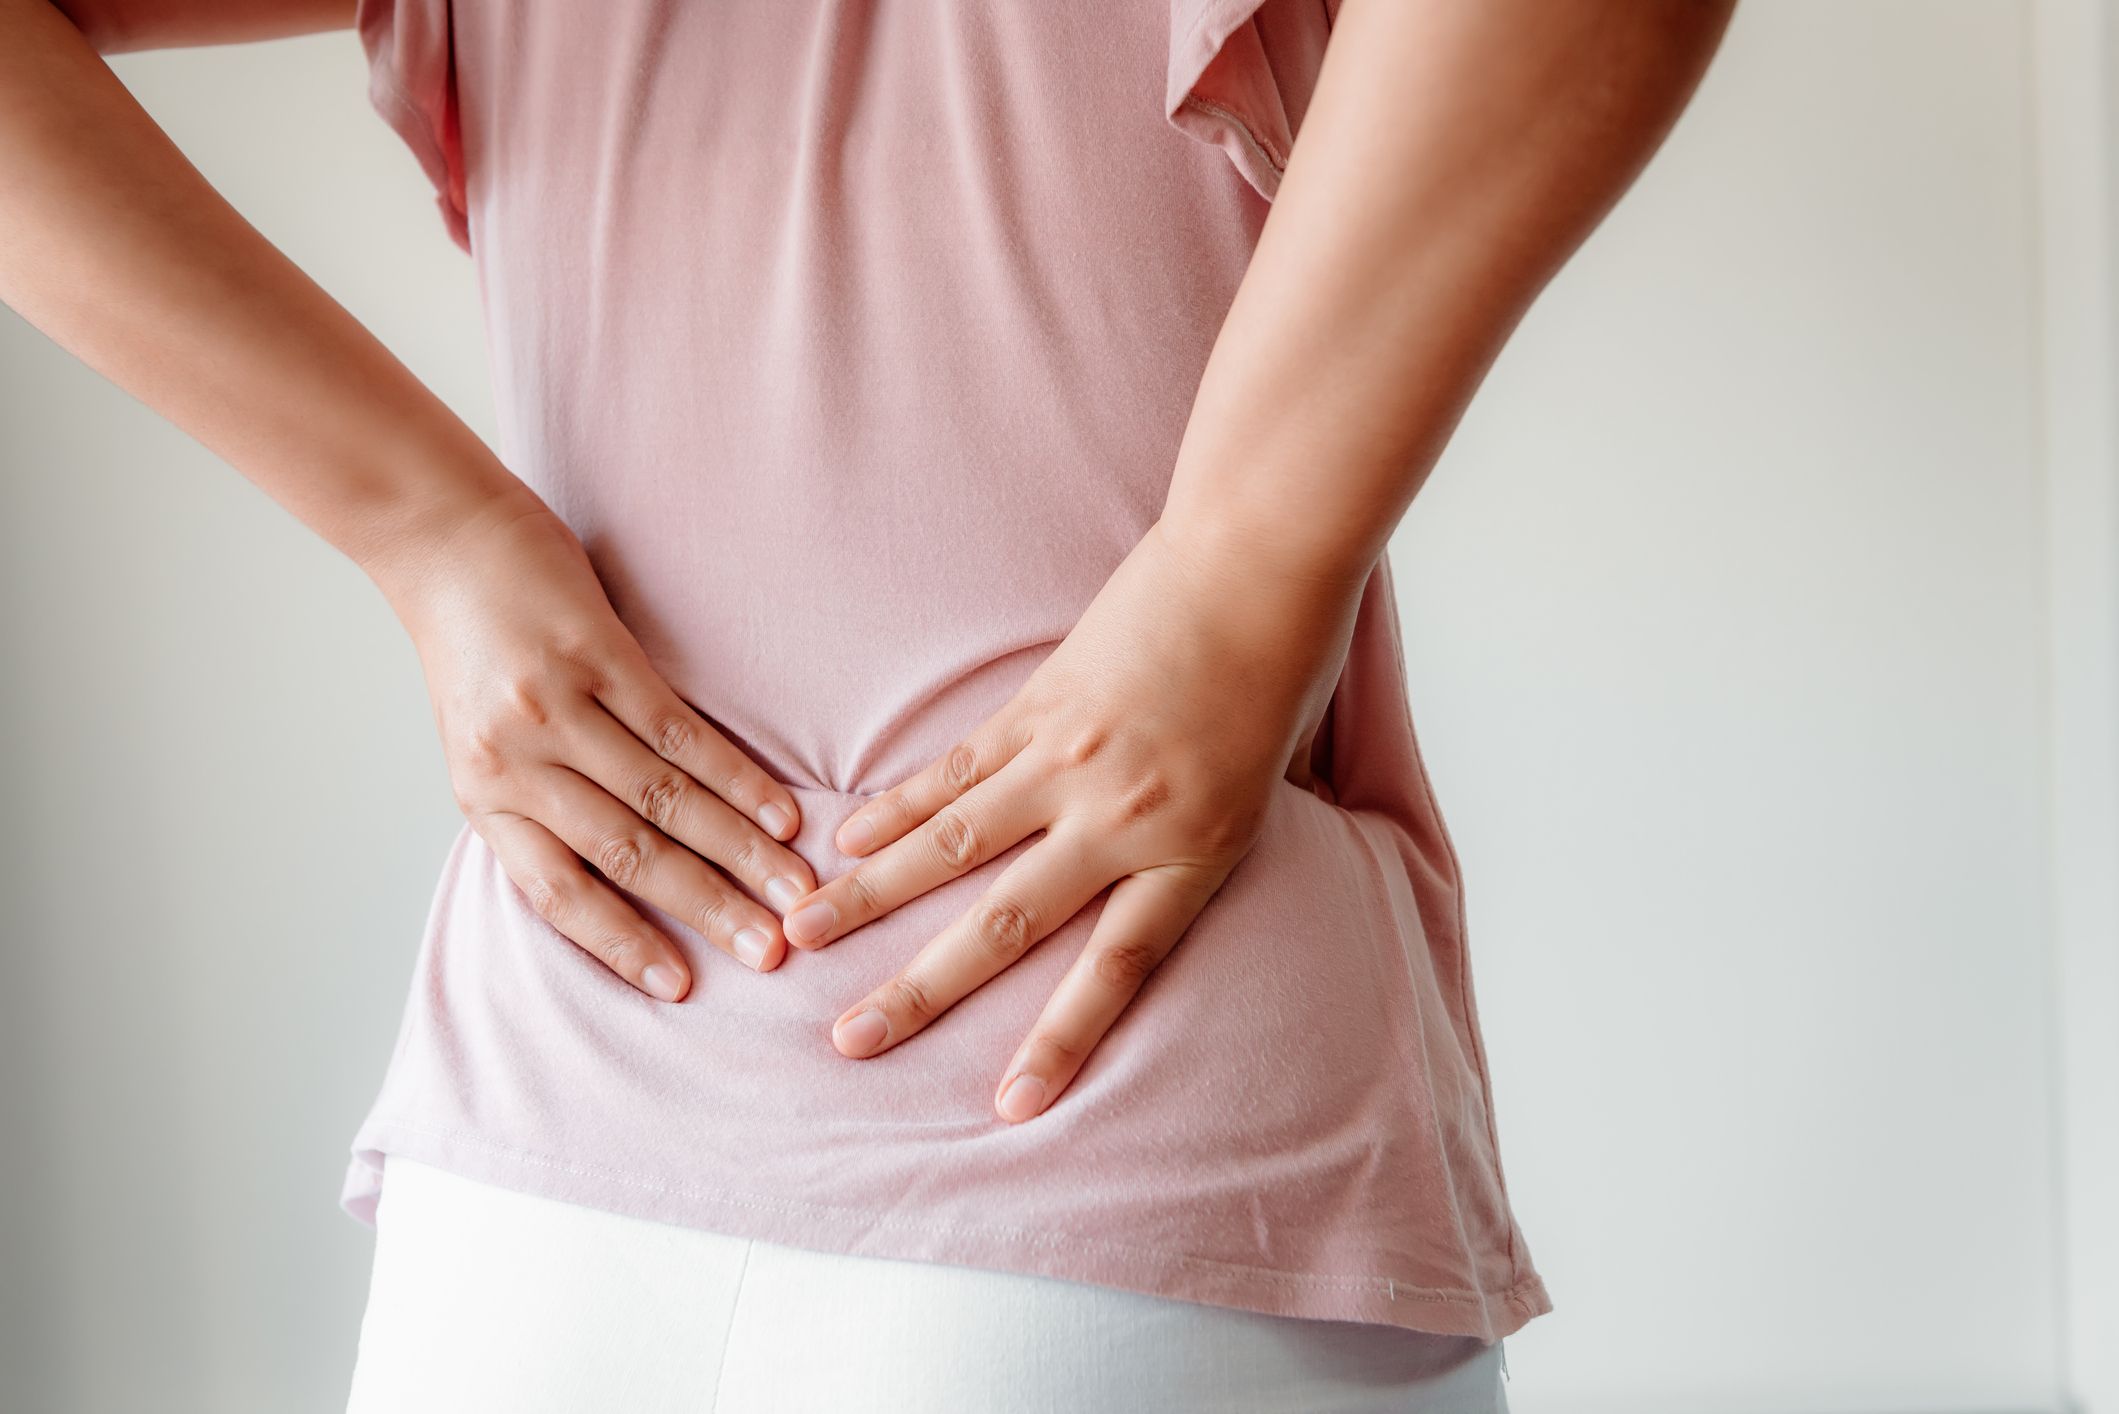 Lower Back Pain: What Could It Be?